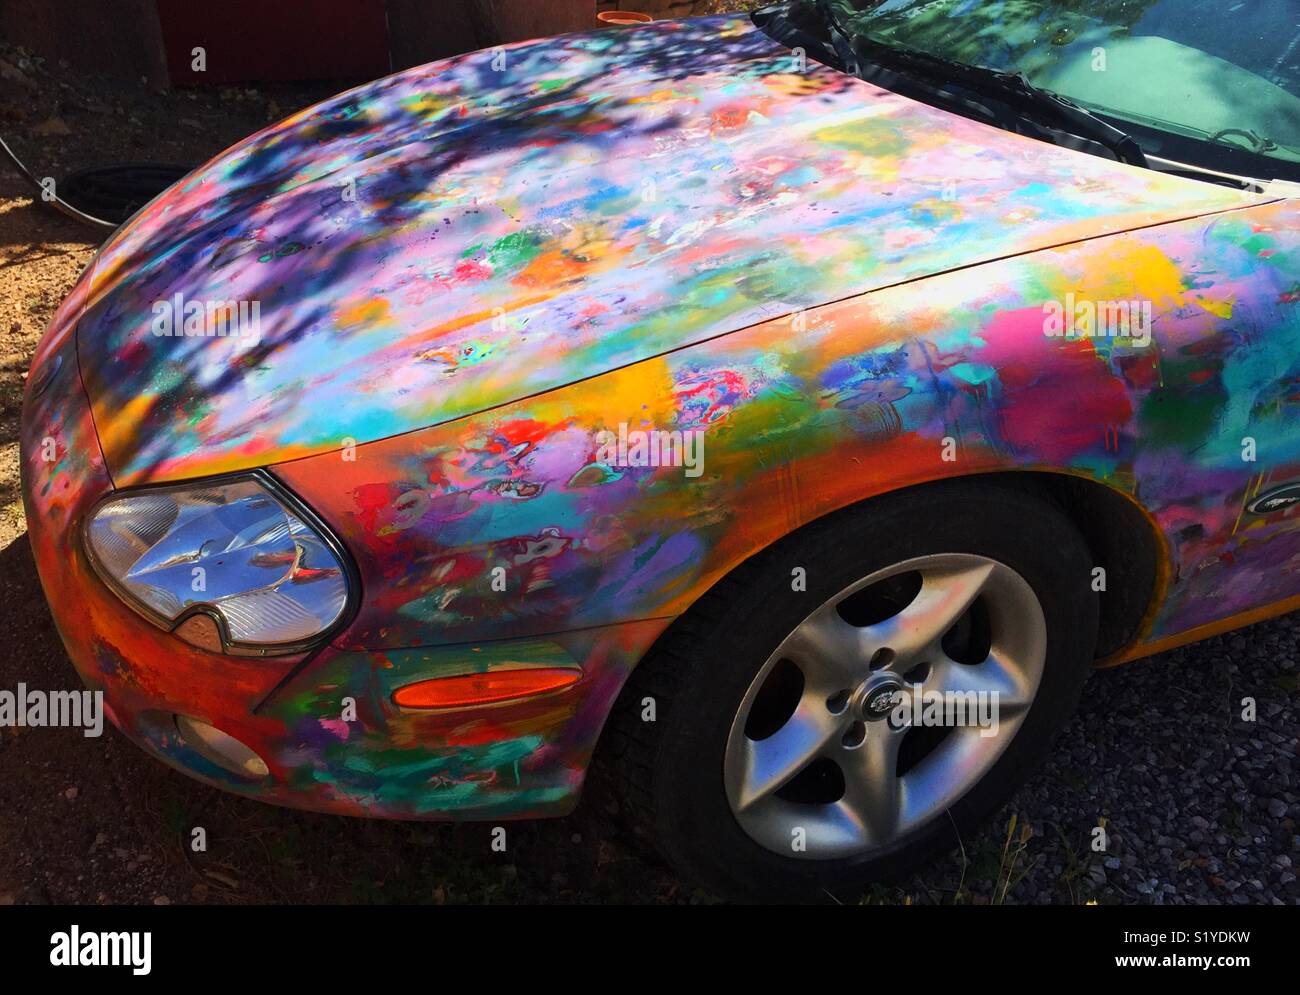 Artistic expressionist abstract painting on car Stock Photo